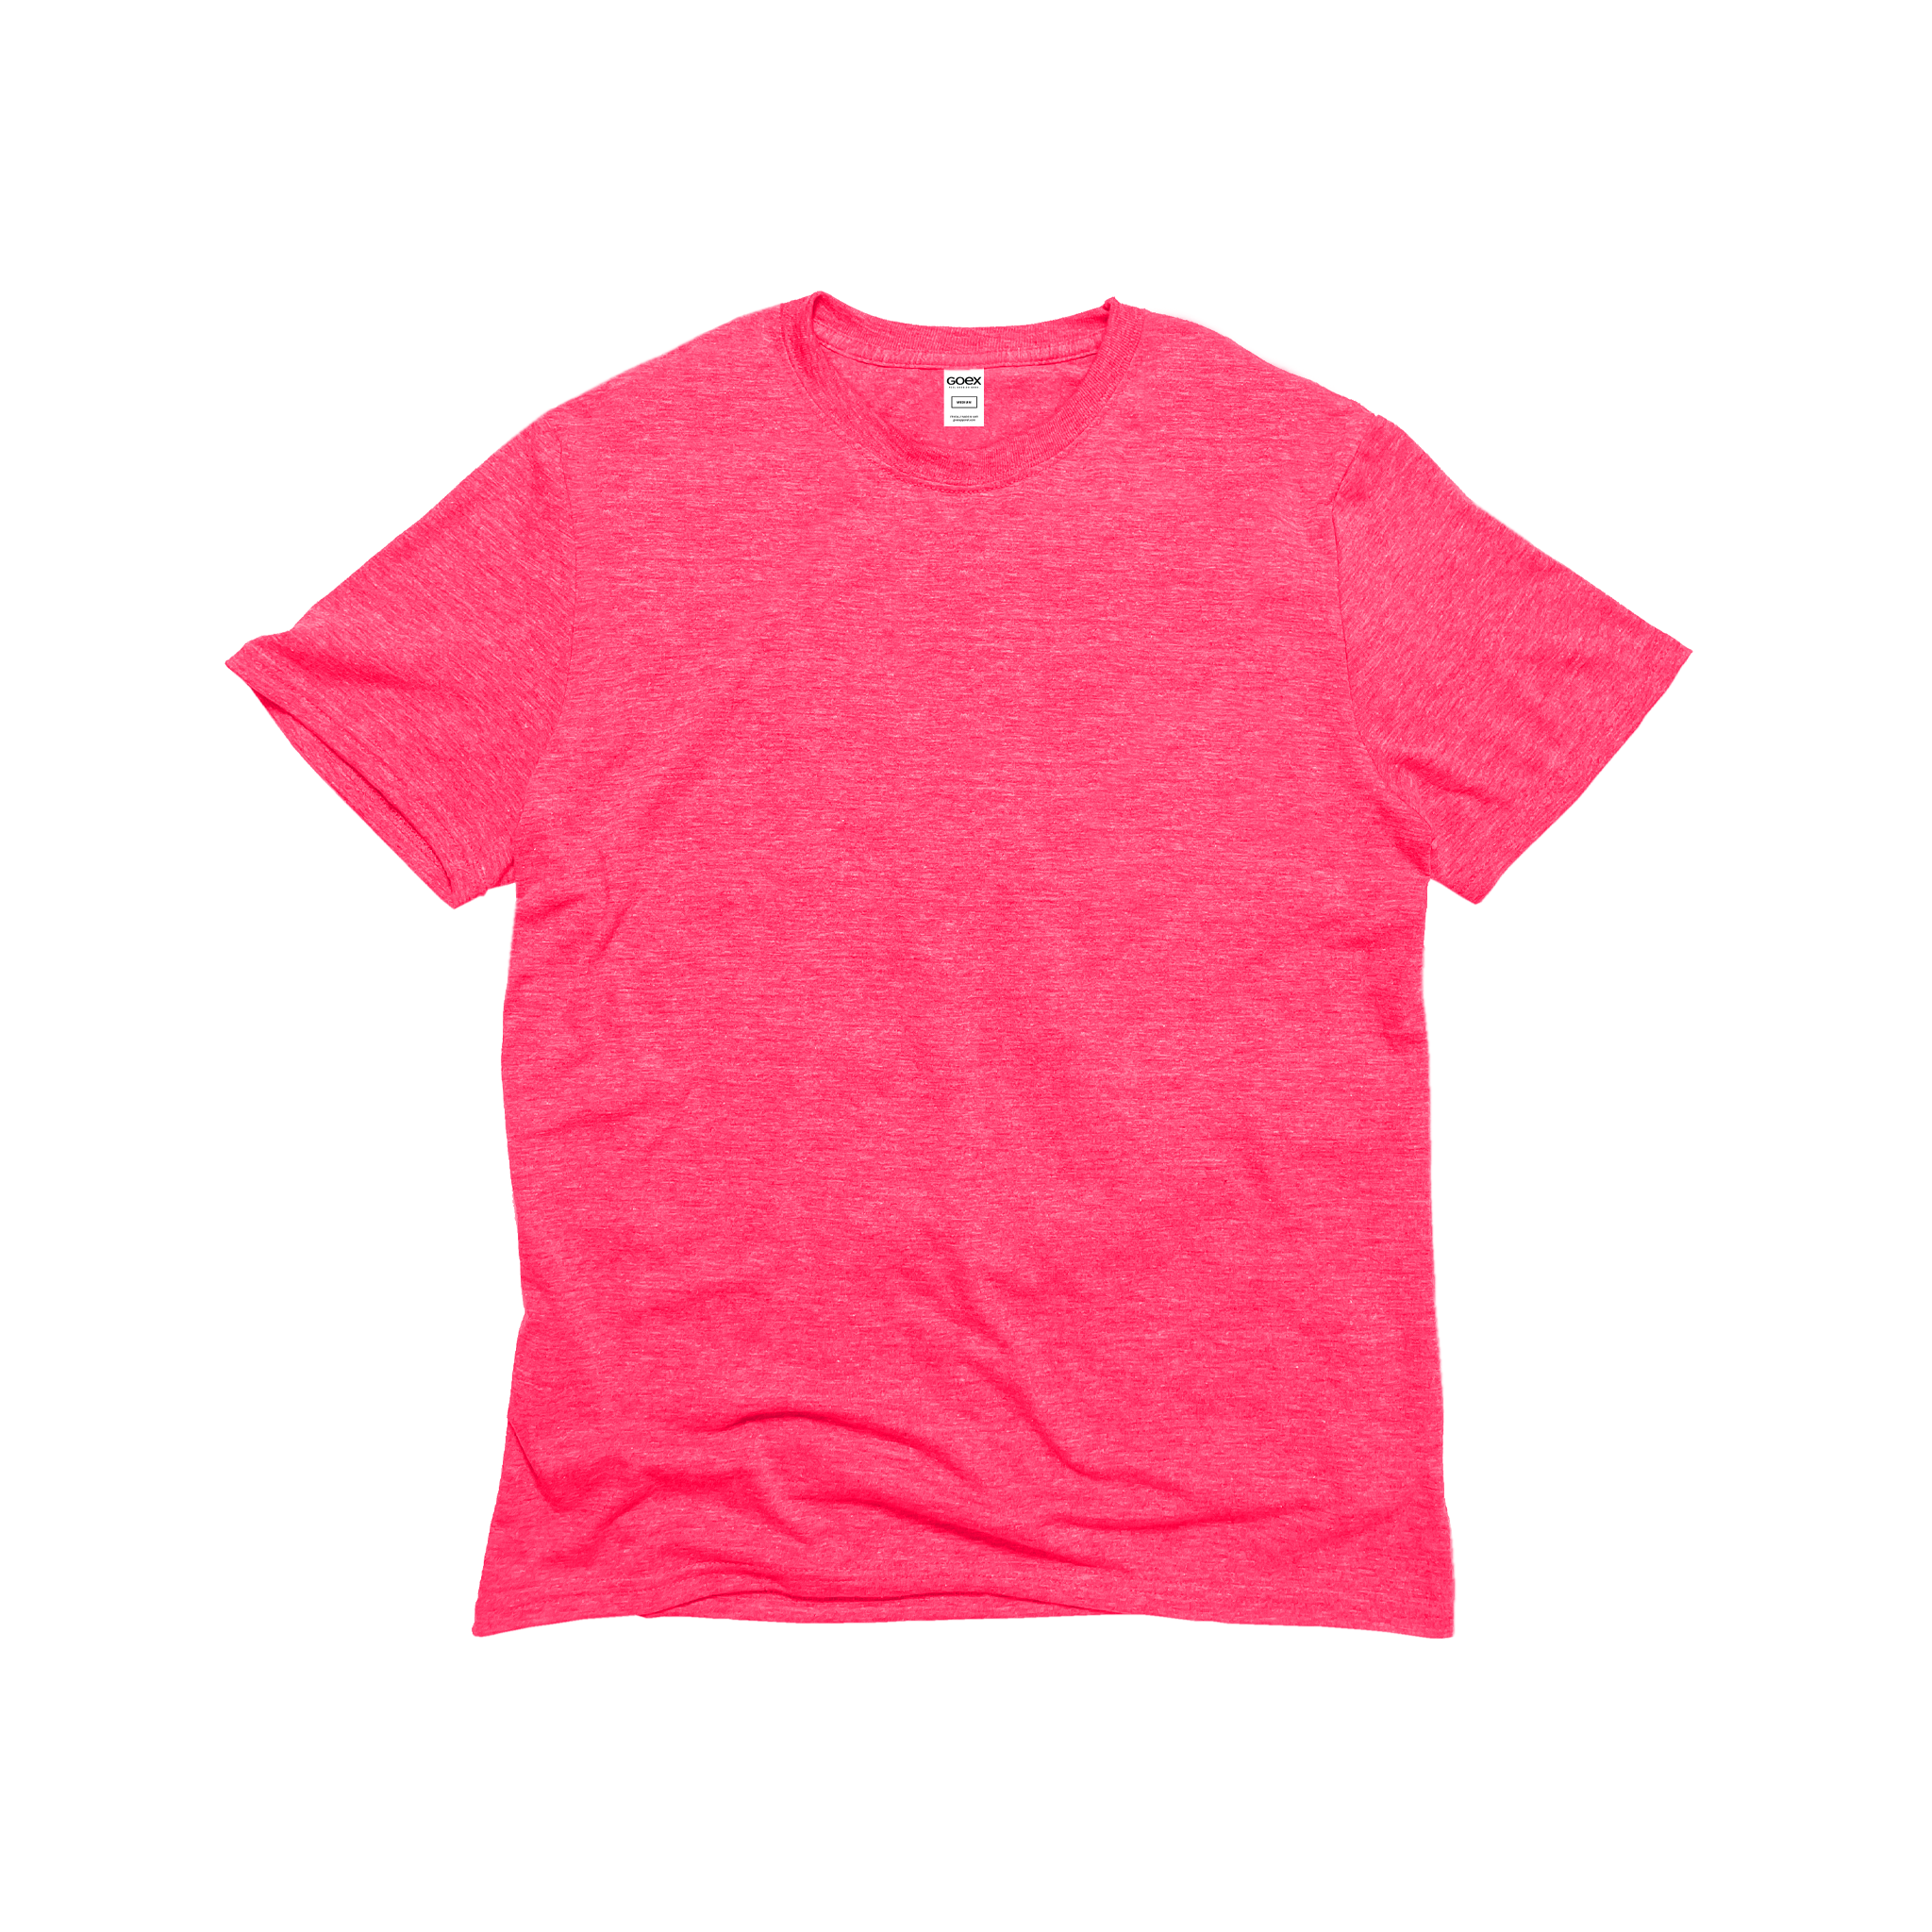 Front Flat Lay of GOEX Unisex and Men's Eco Triblend Tee in Neon Pink